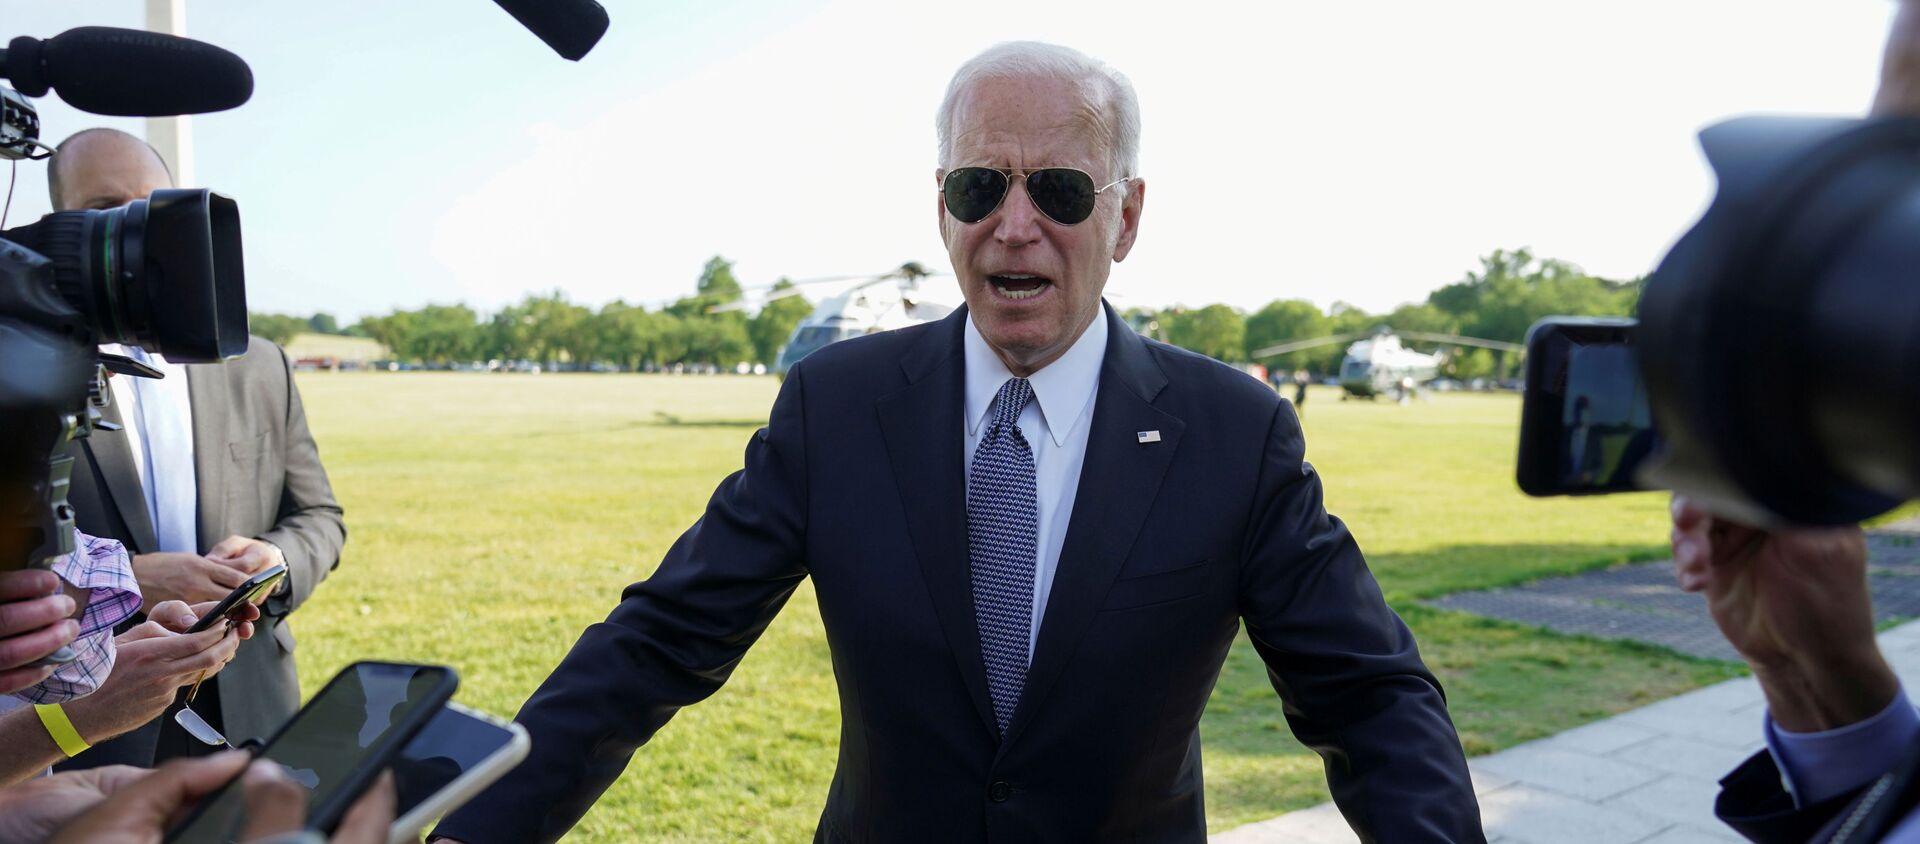 U.S. President Joe Biden speaks to reporters upon his departure from the White House in Washington, U.S., May 25, 2021. REUTERS/Kevin Lamarque/File Photo - Sputnik International, 1920, 27.05.2021